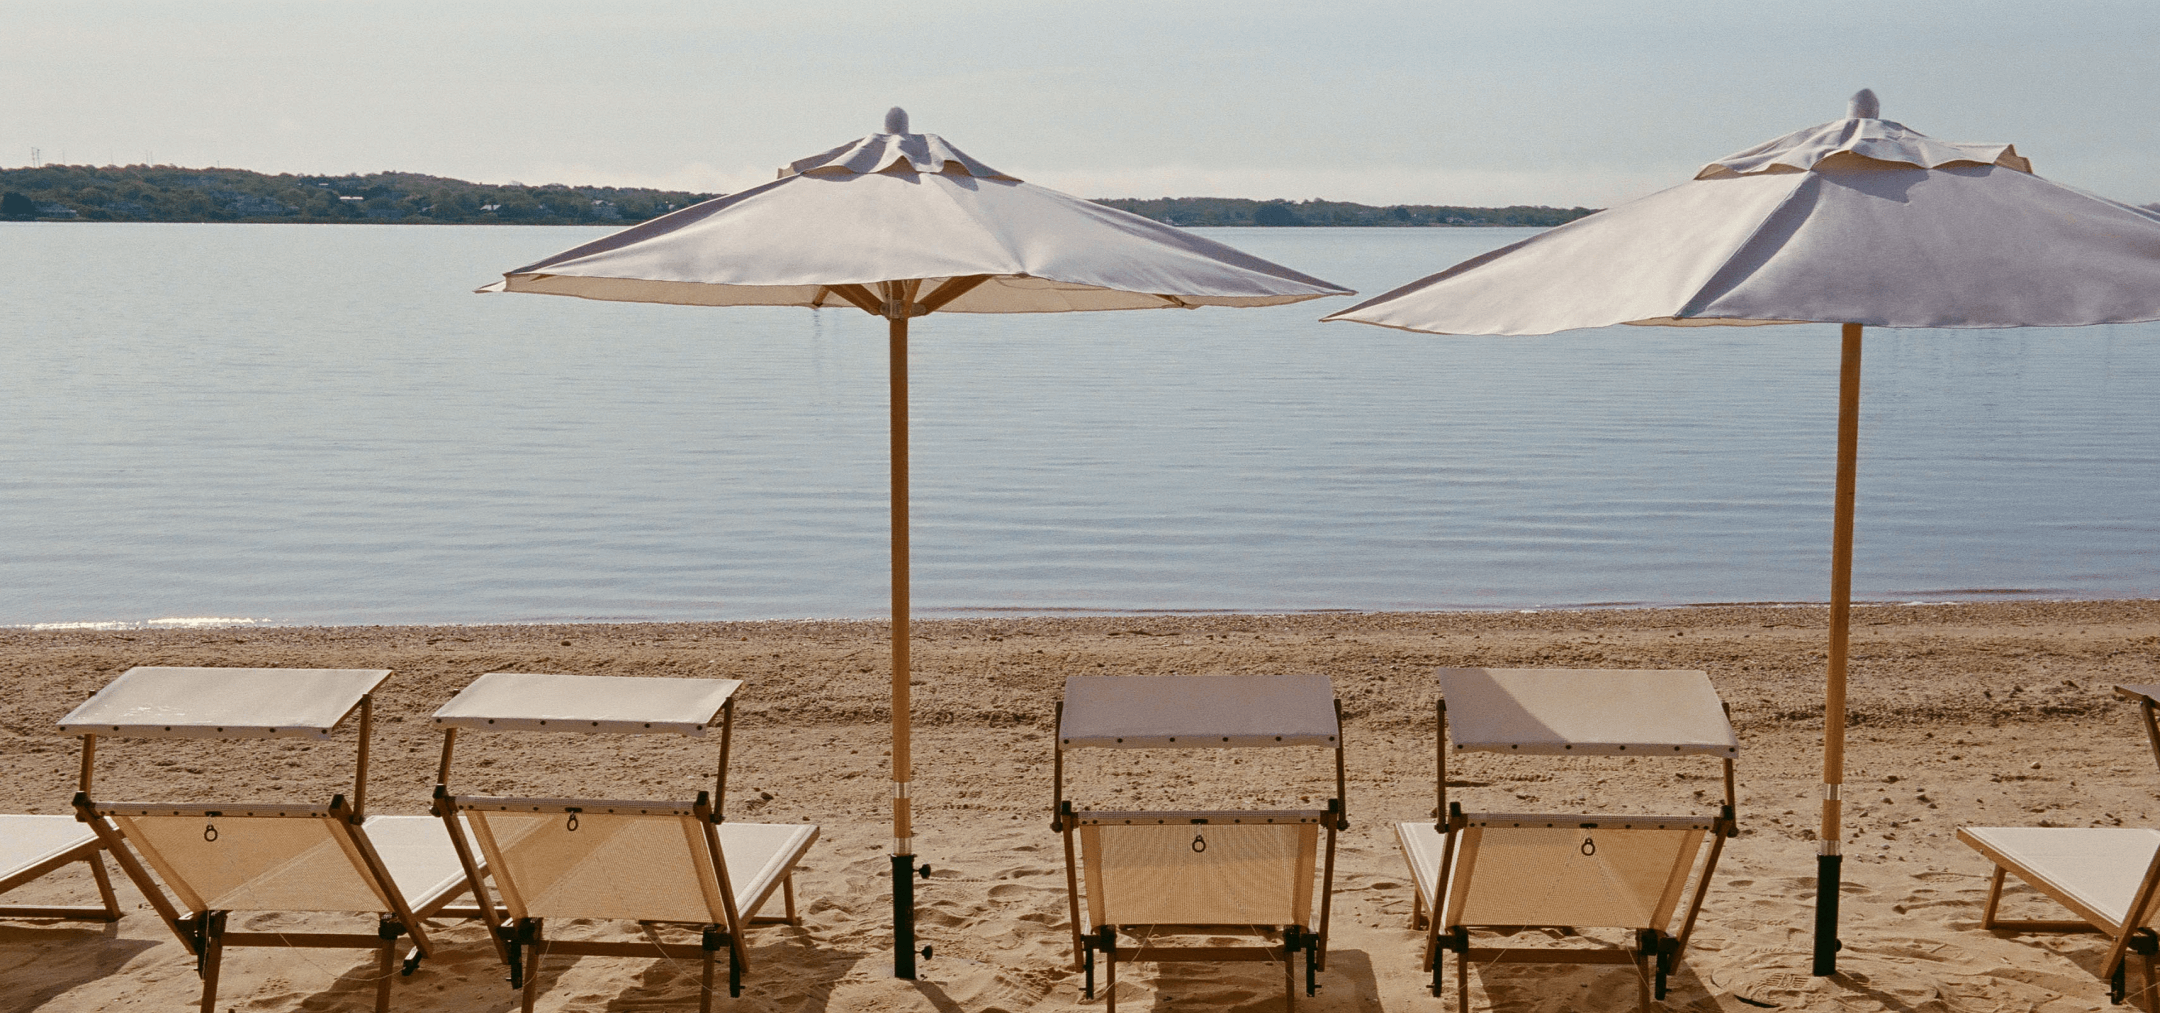 Many lounge chairs are placed along the shore, providing a splendid view of the sea.